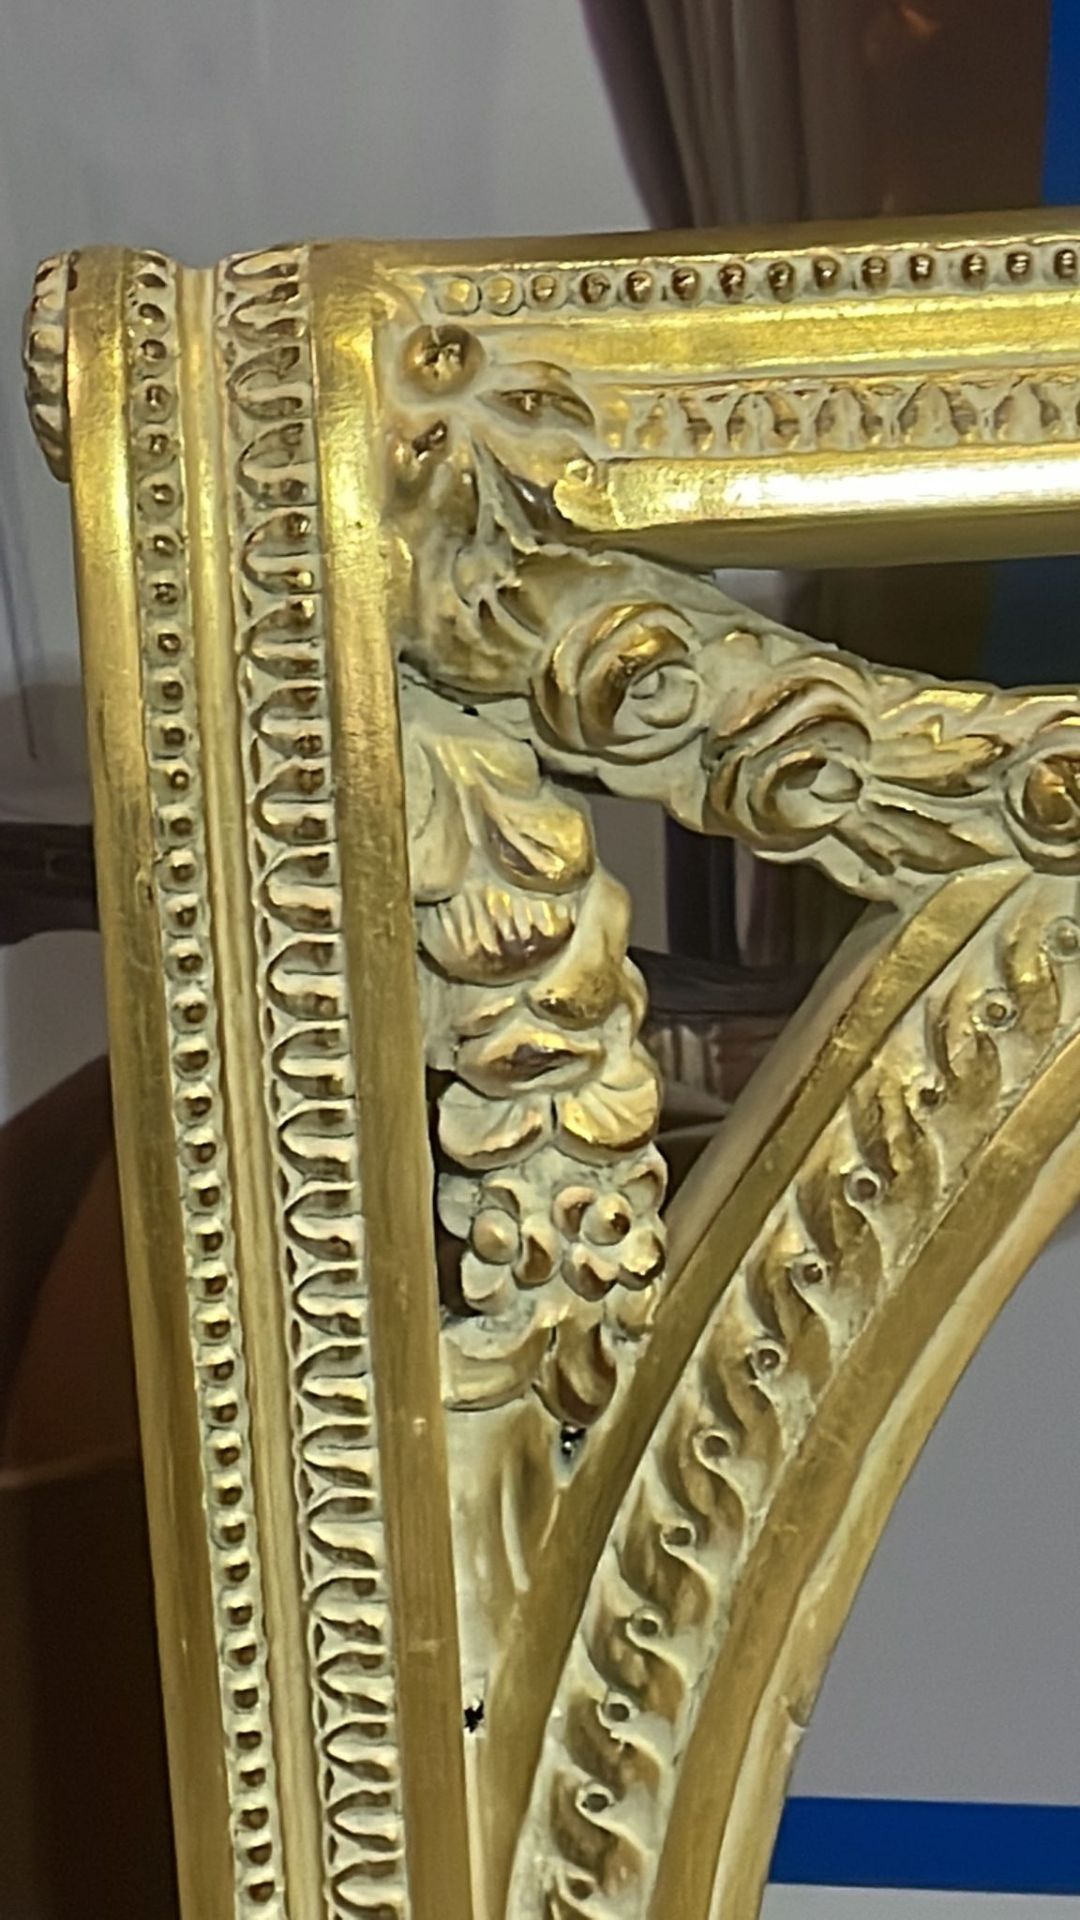 Gold Showood Armchair Frame Ornate Carving Ready For Upholstery Completion 55 x 62 x 102cm - Bild 2 aus 4